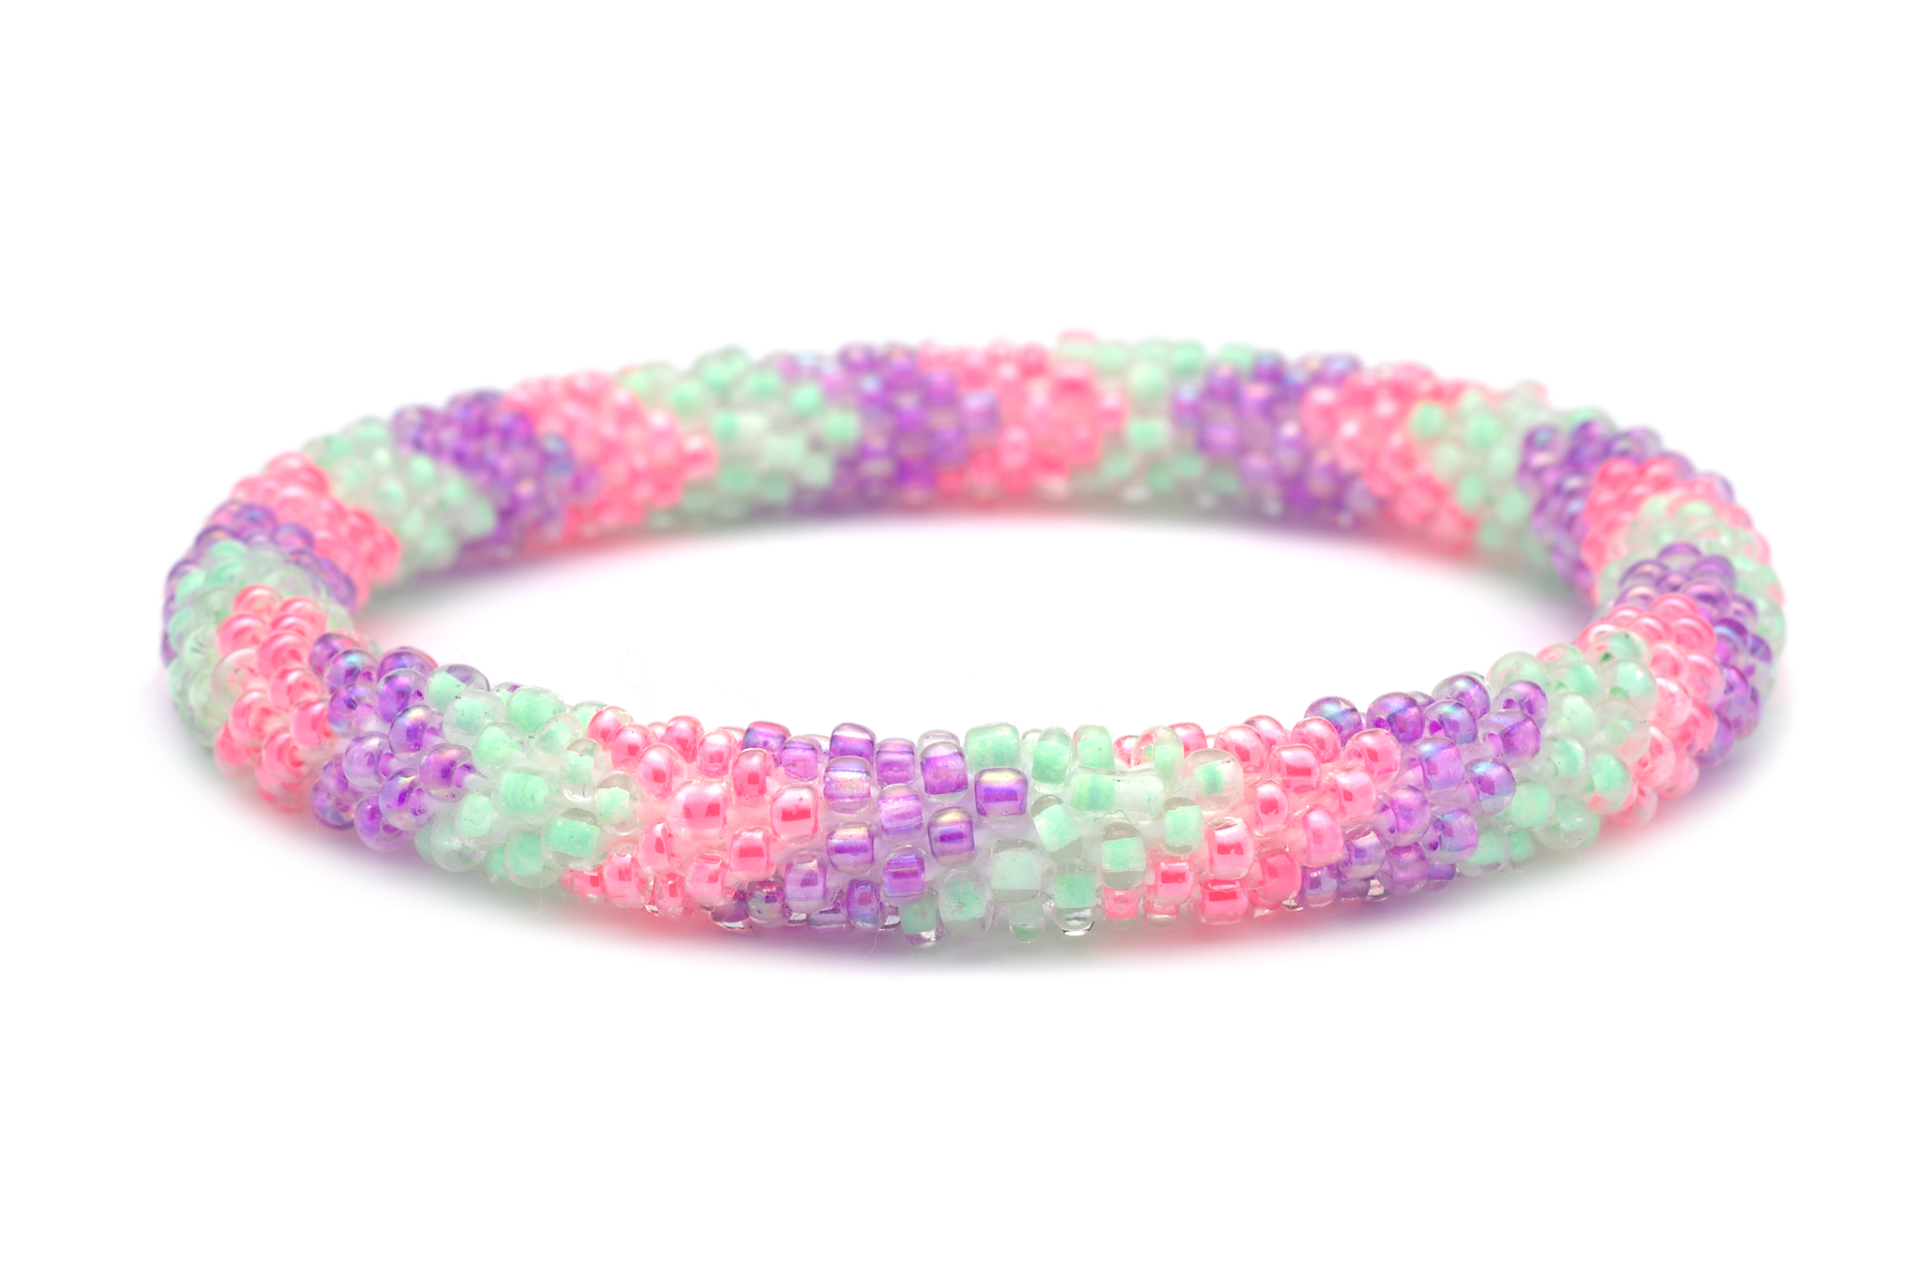 Sashka Co. Sashka Anklet Pink / Purple / Mint Young and Fun Anklet - Extended 11"